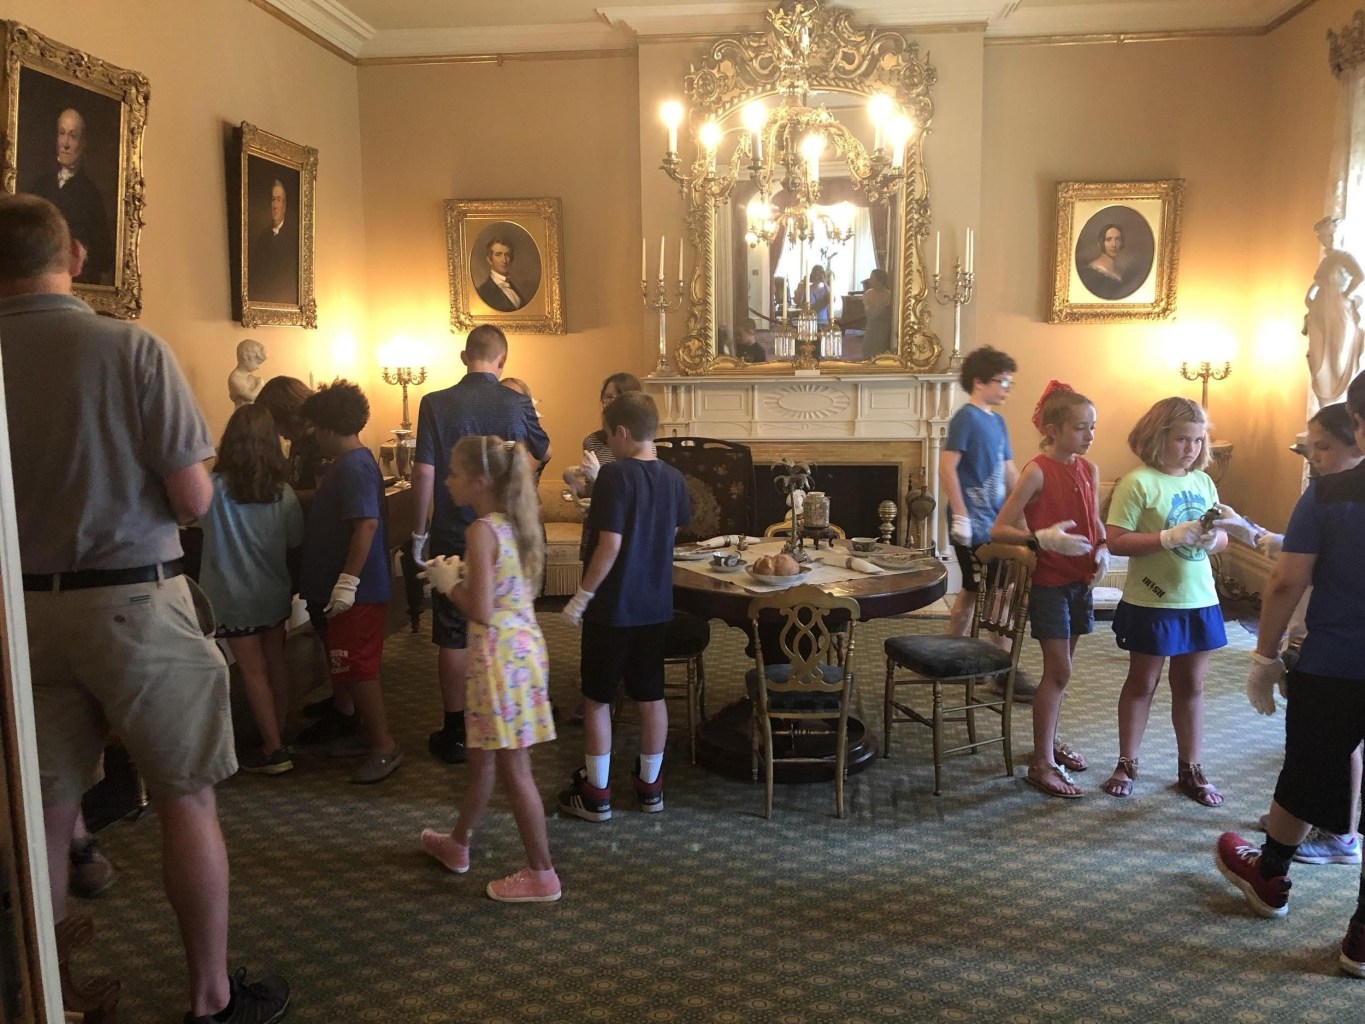 A group of campers wearing white gloves explore the interior of a historic house.